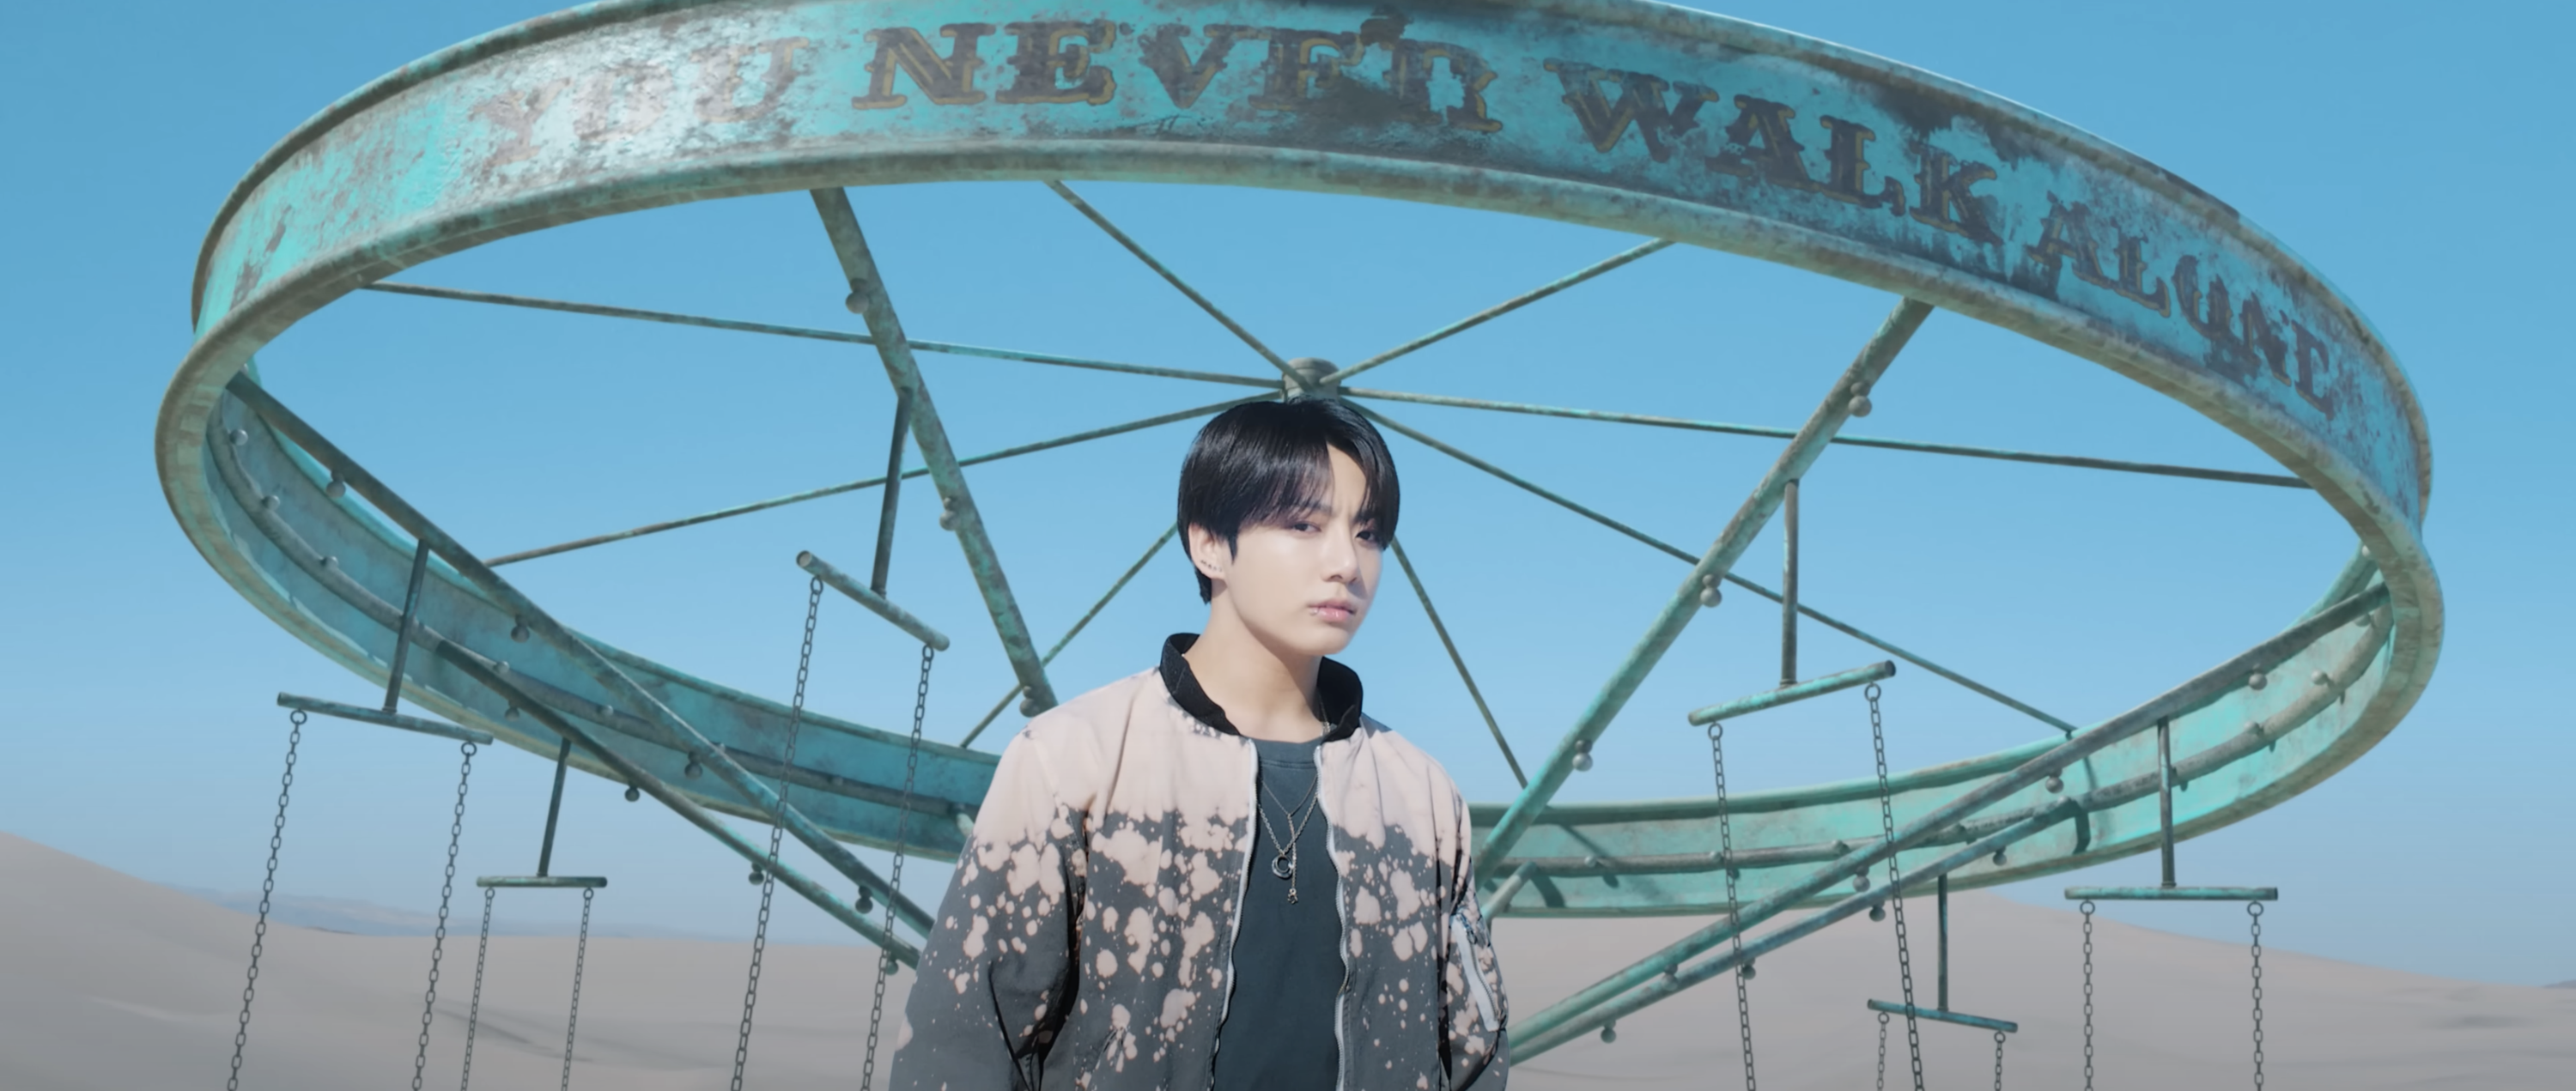 A member of BTA stands under a carousel with the words &quot;you never walk alone&quot; written on it